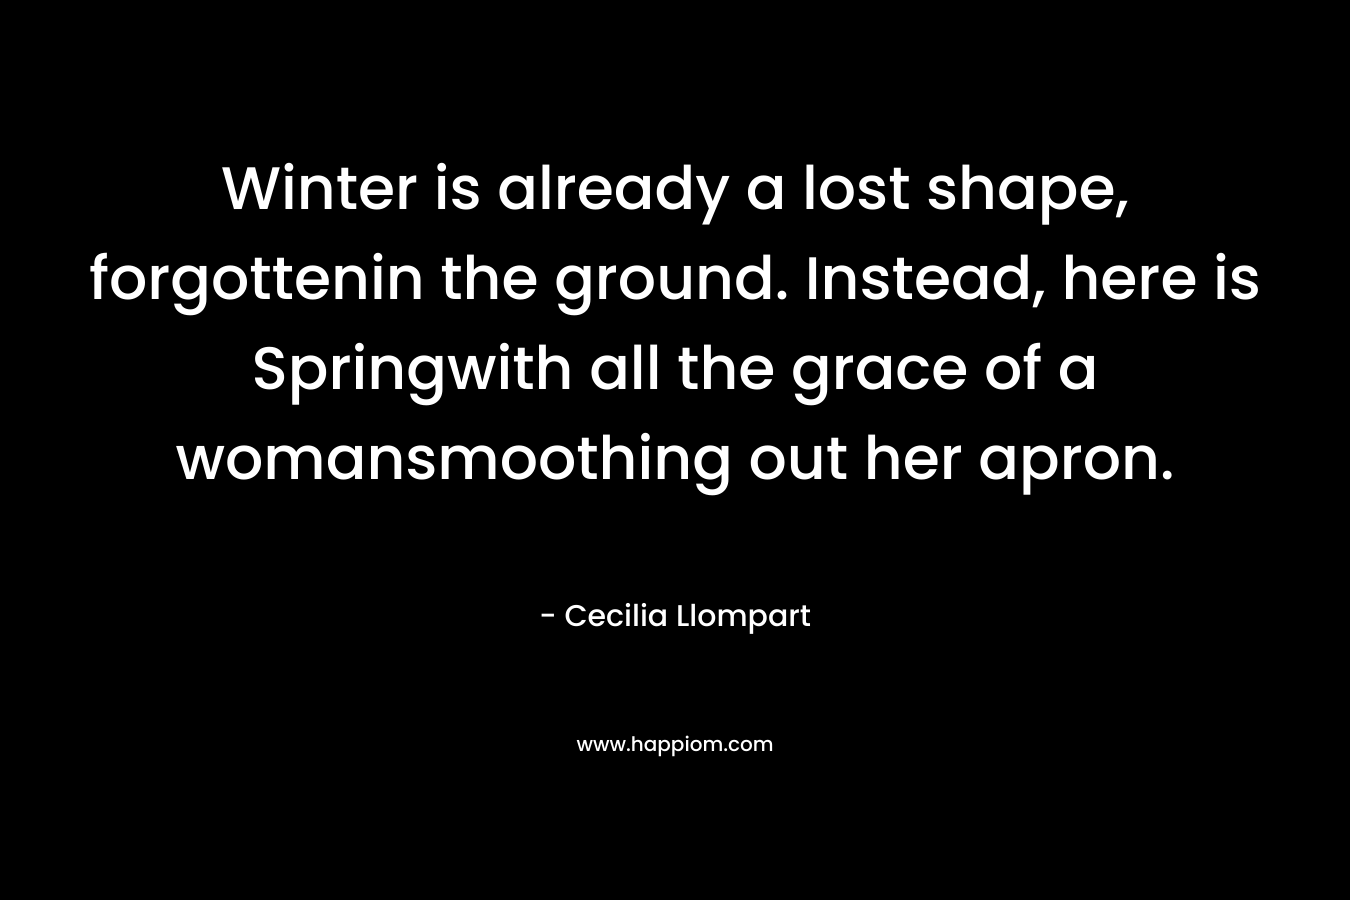 Winter is already a lost shape, forgottenin the ground. Instead, here is Springwith all the grace of a womansmoothing out her apron.